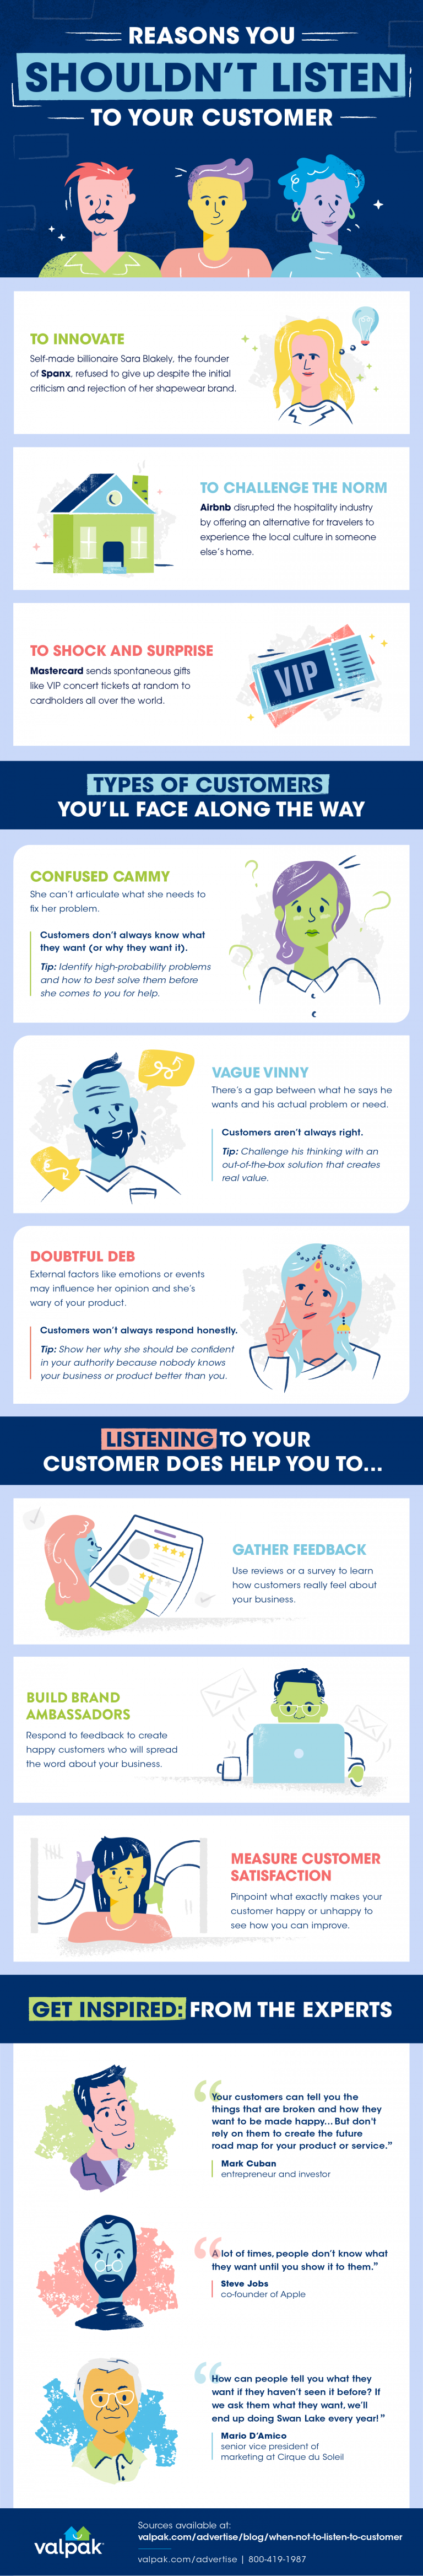 reasons-not-to-listen-to-customer